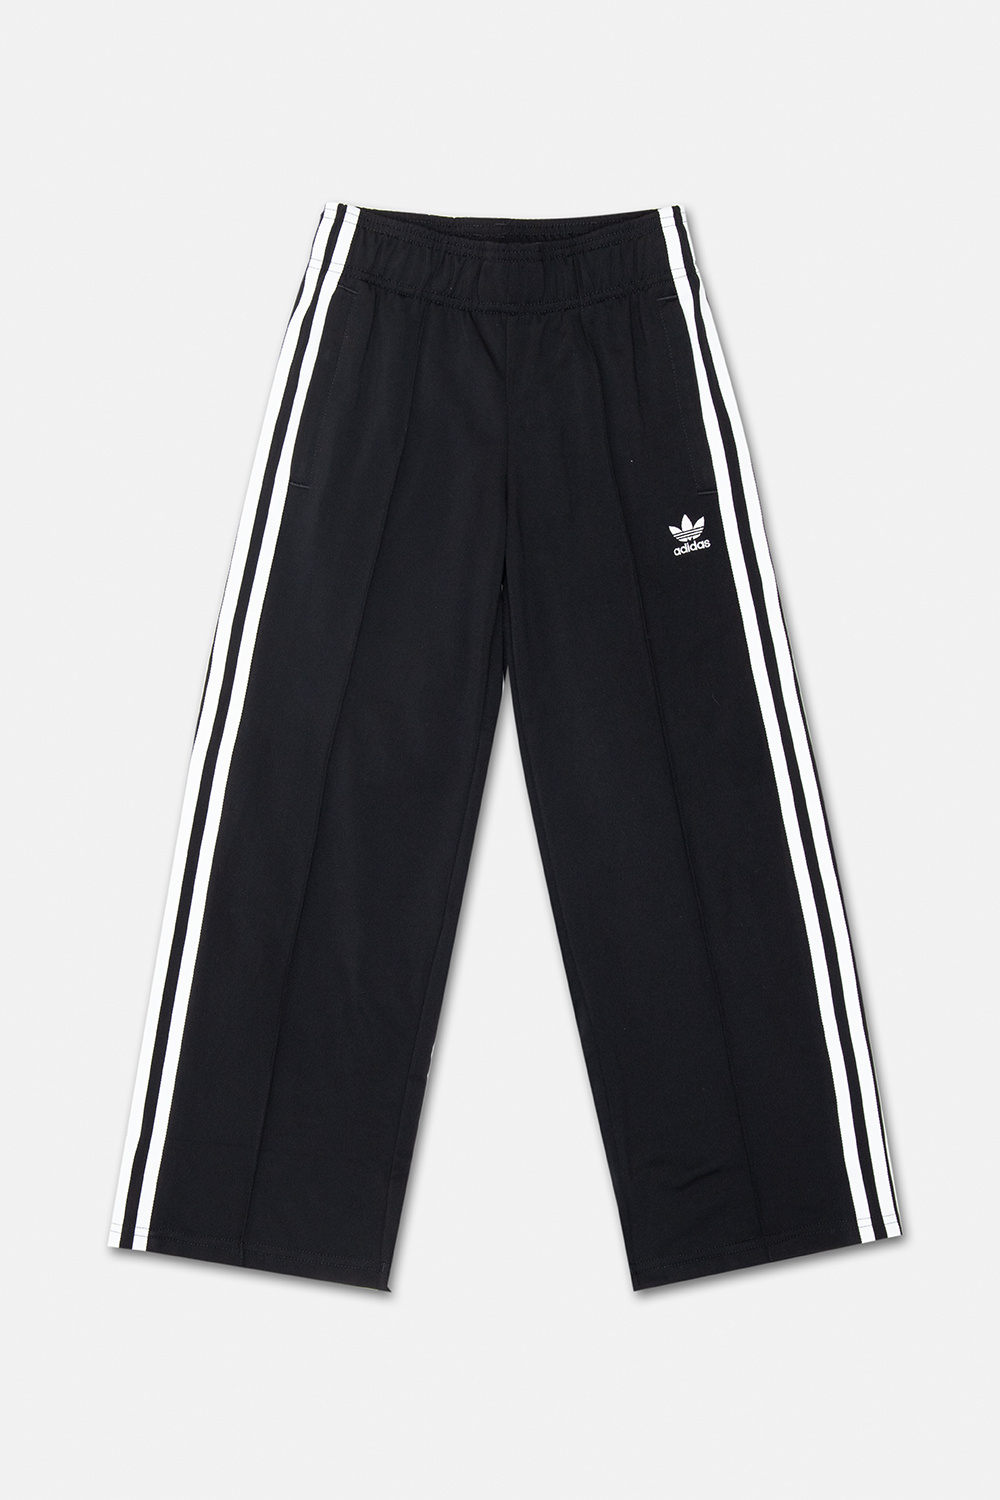 adidas Stone Kids Trousers with logo